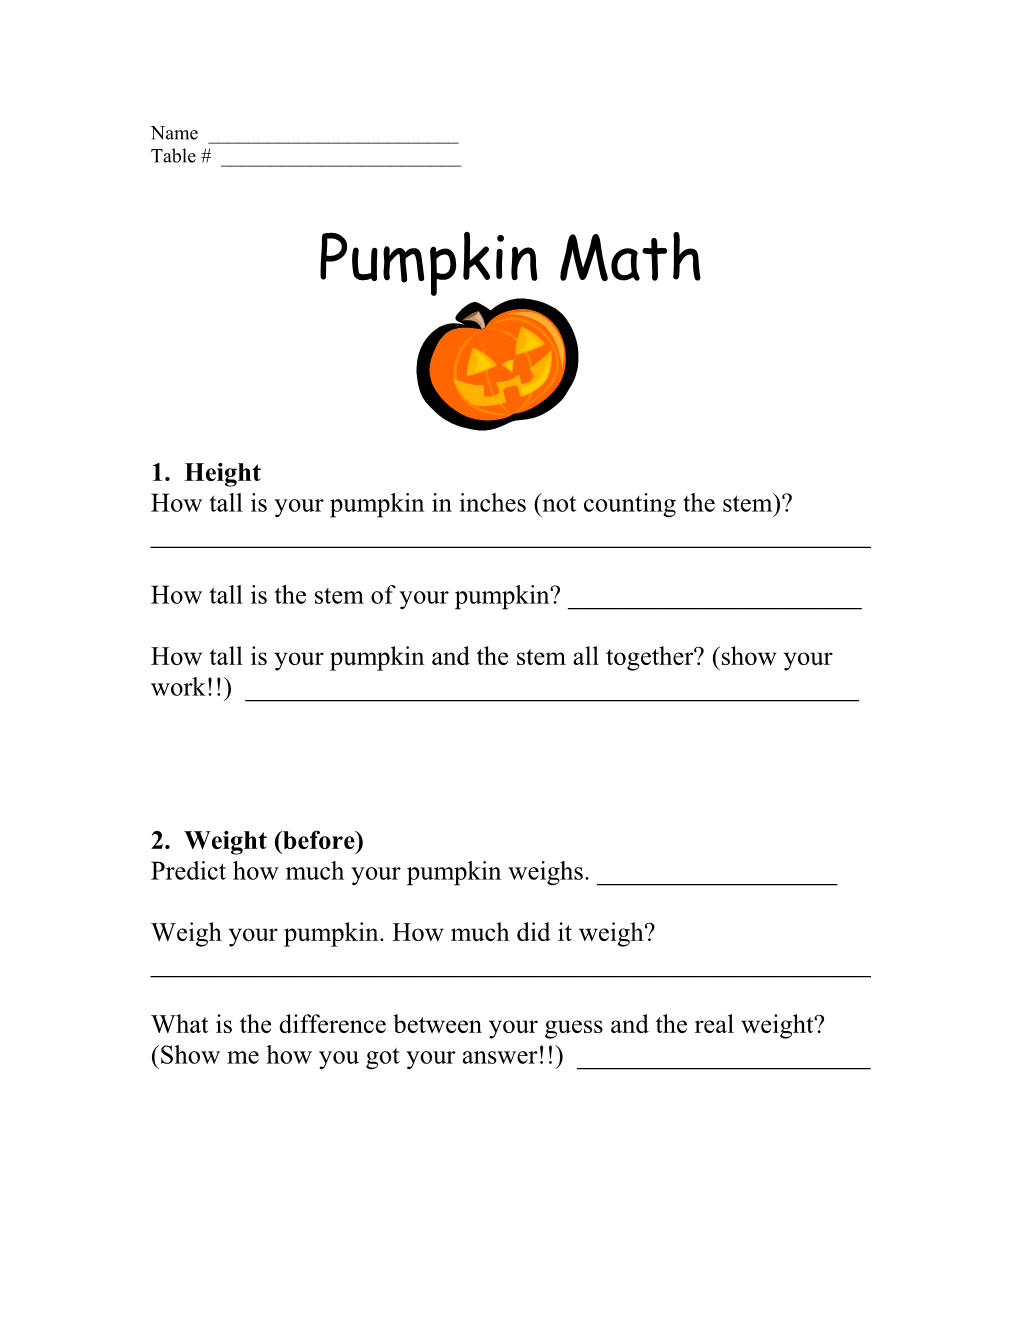 How Tall Is Your Pumpkin in Inches (Not Counting the Stem)? ______